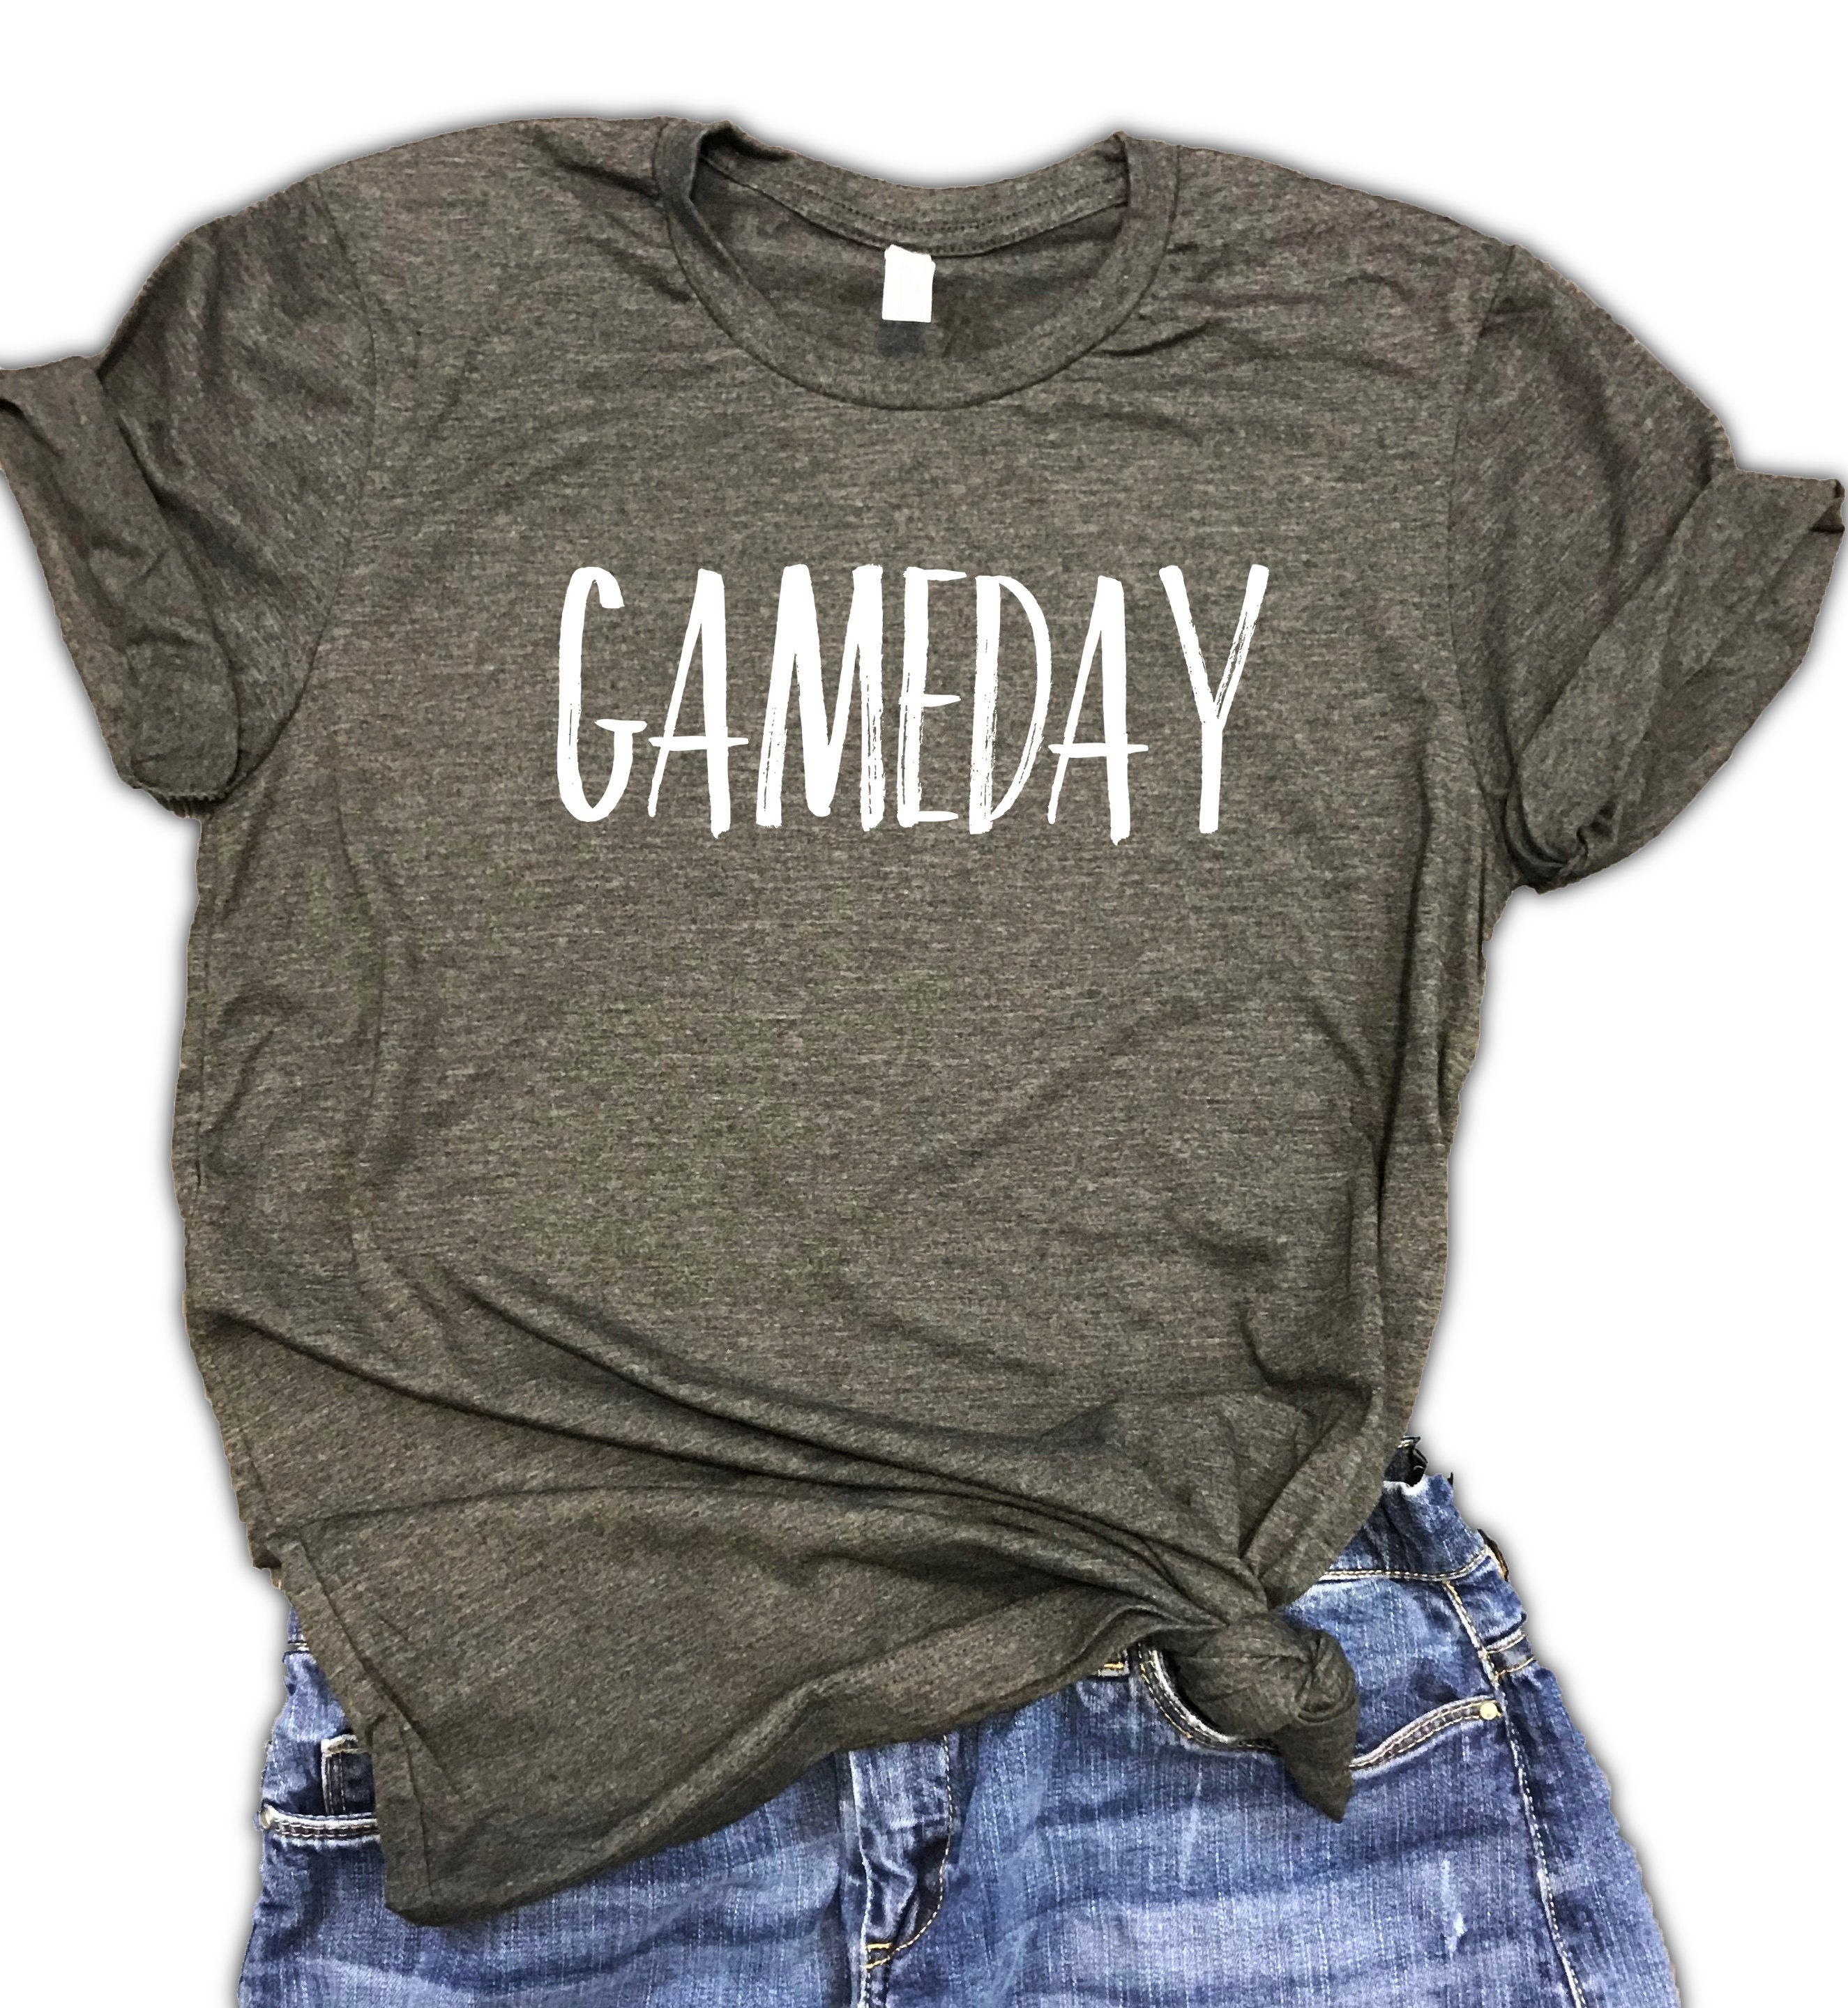 Gameday Unisex Relaxed Fit Soft Blend Tee - Football Shirt Mom Game Day Sunday Funday